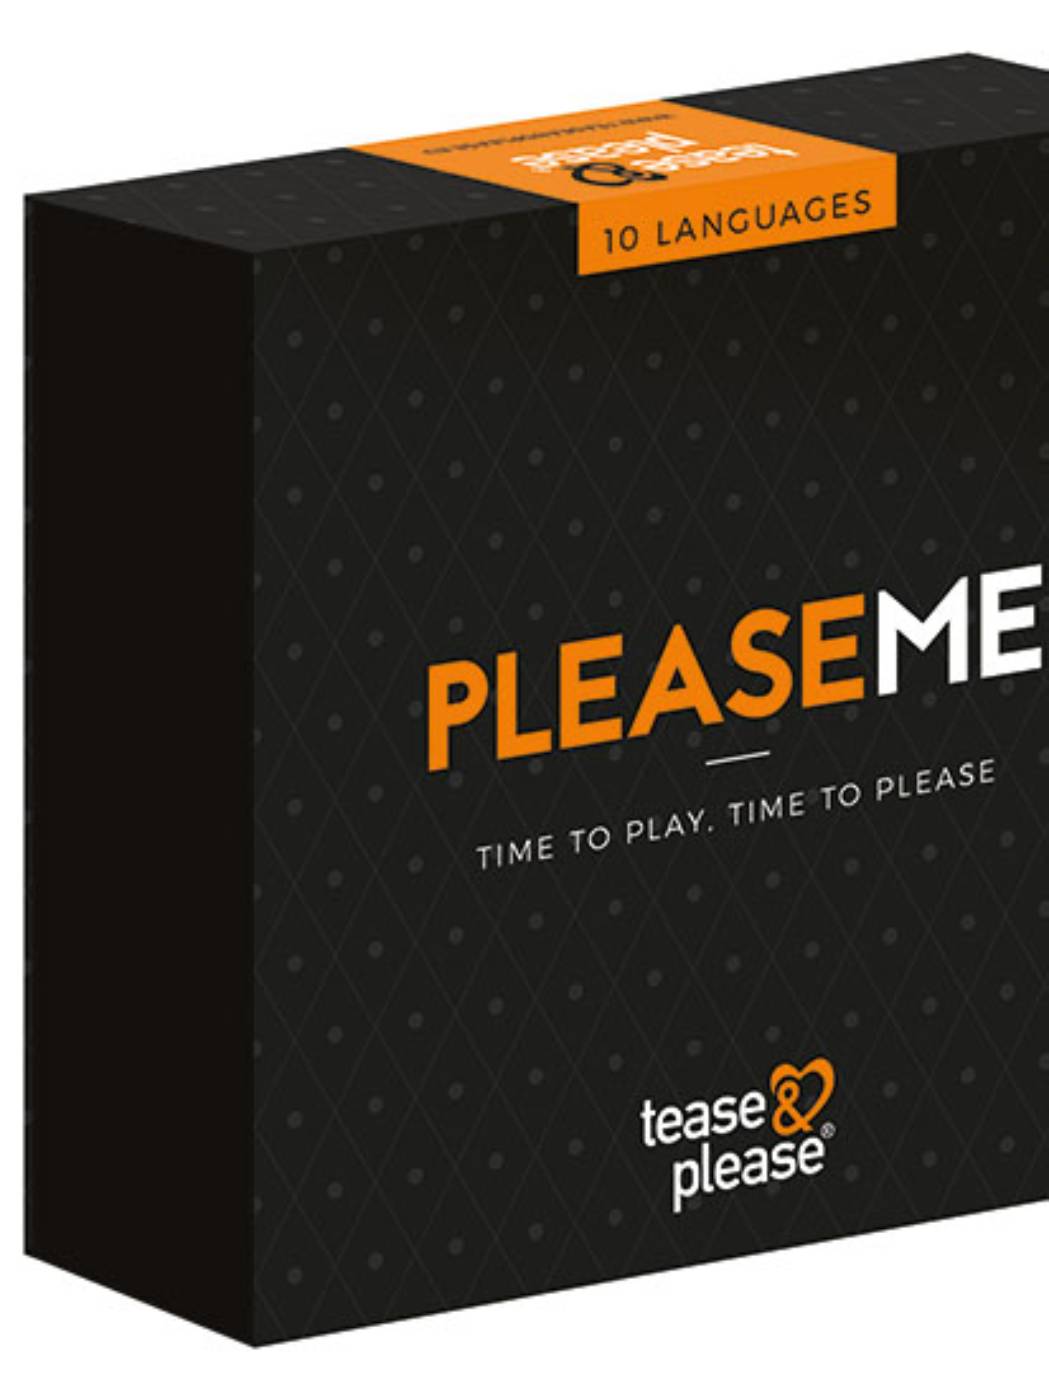 "PLEASEME" - Time to Play